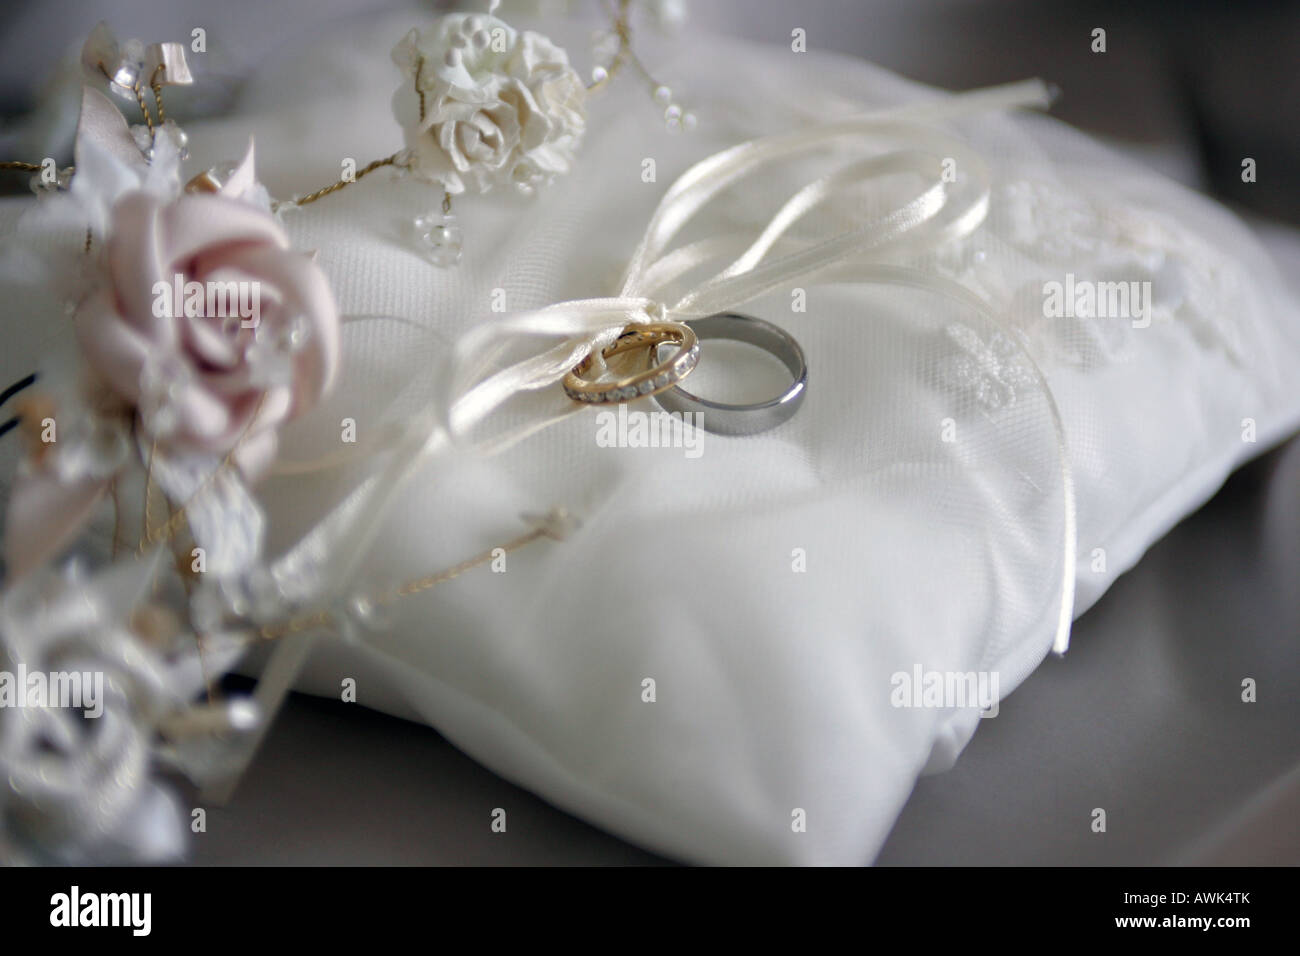 A portrait of a bride and grooms wedding rings seen here on a white cushion surrounded by a bouquet of flowers Stock Photo